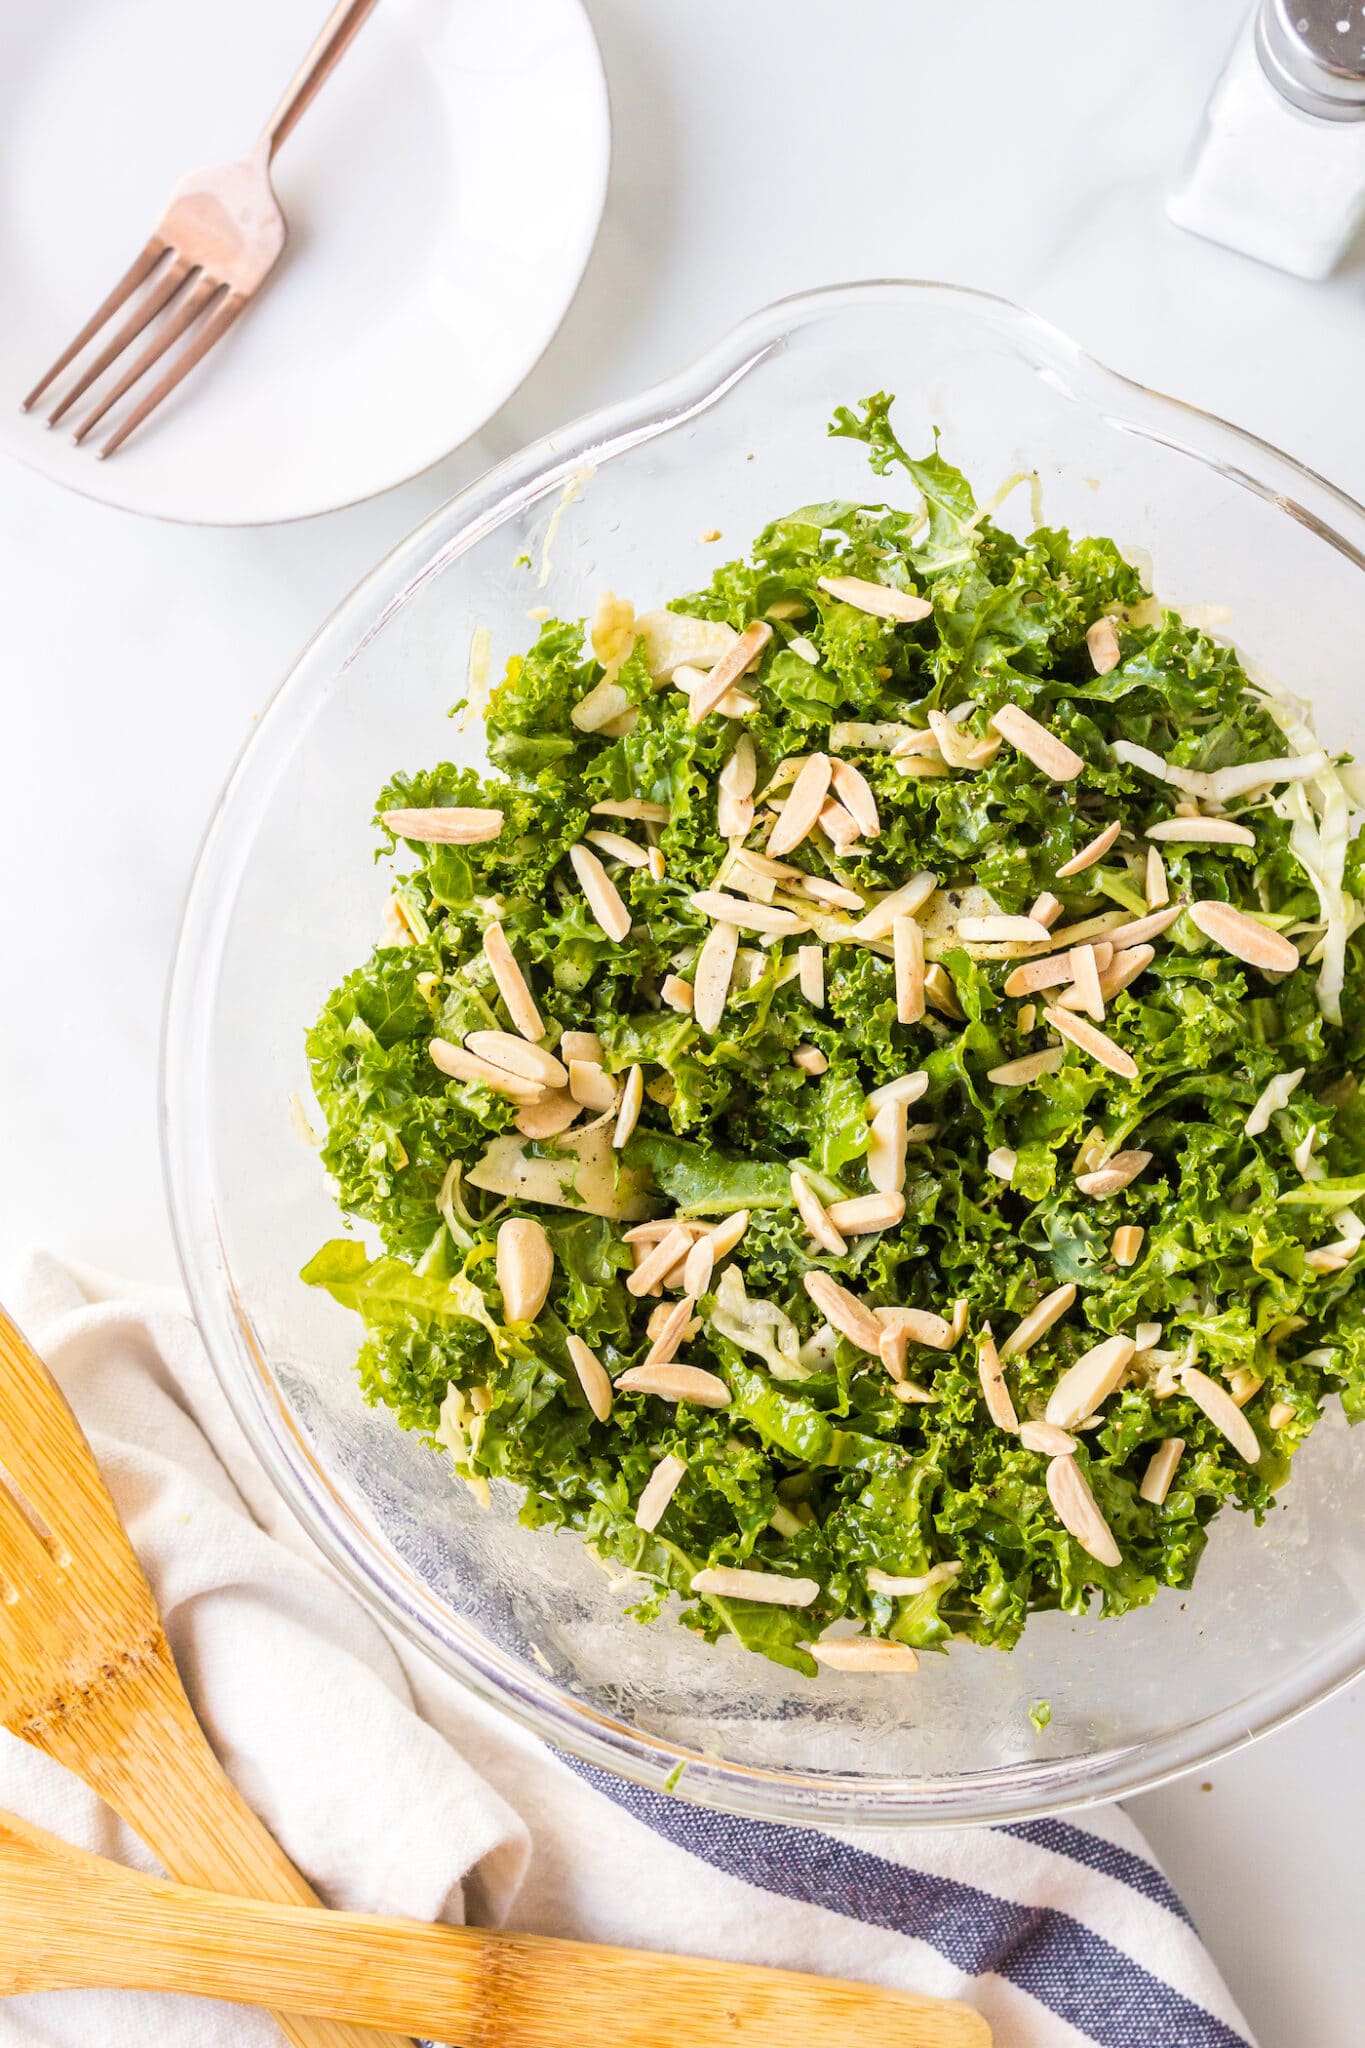 Chopped kale salad topped with slivered almonds in a glass bowl.